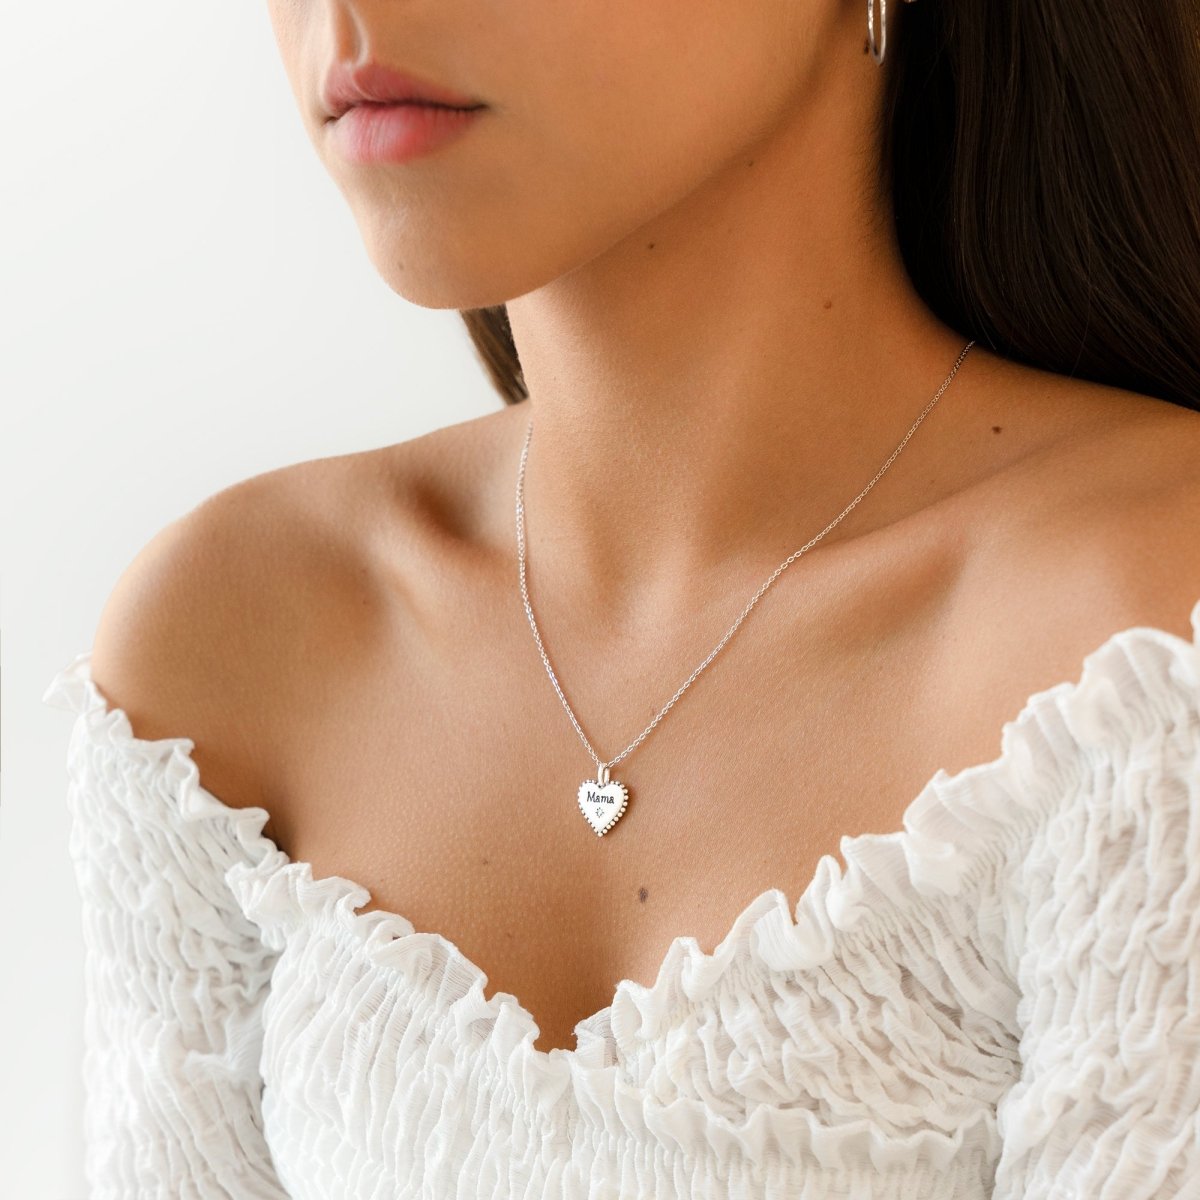 "Mom Heart" Necklace - Milas Jewels Shop